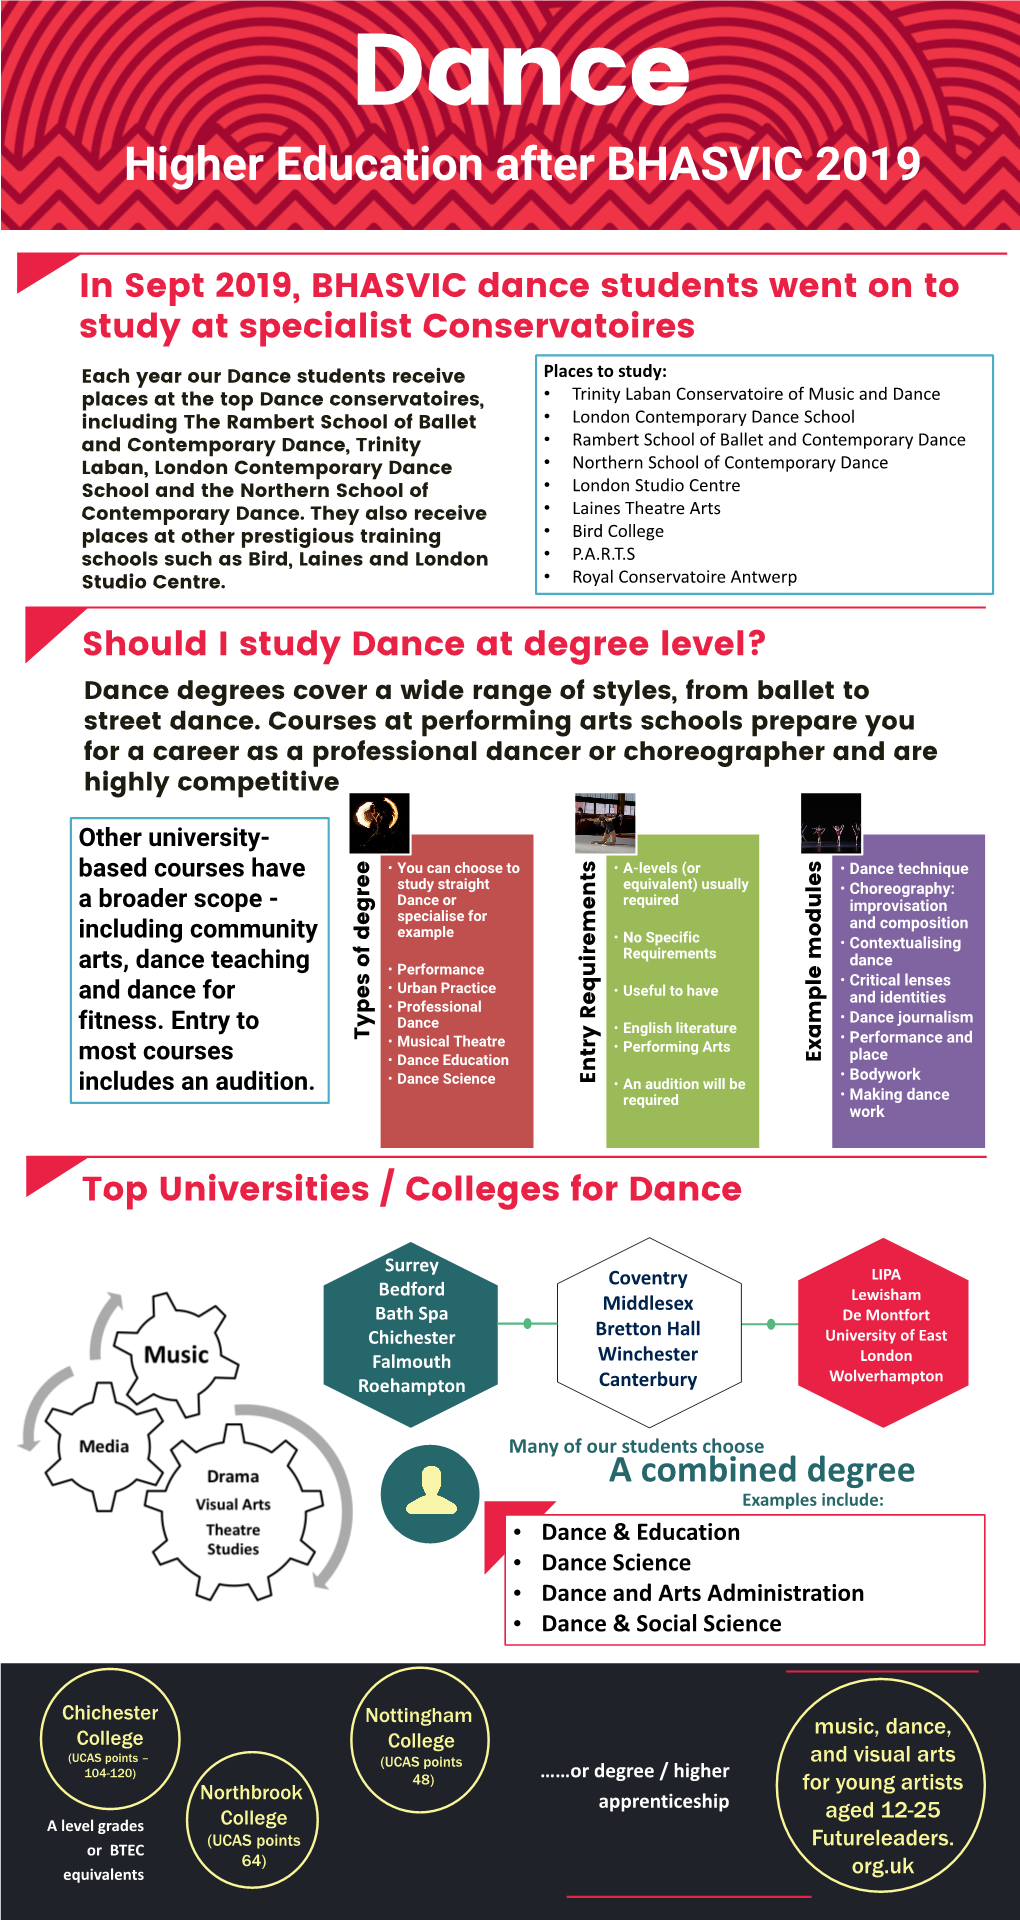 In Sept 2019, BHASVIC Dance Students Went on to Study At